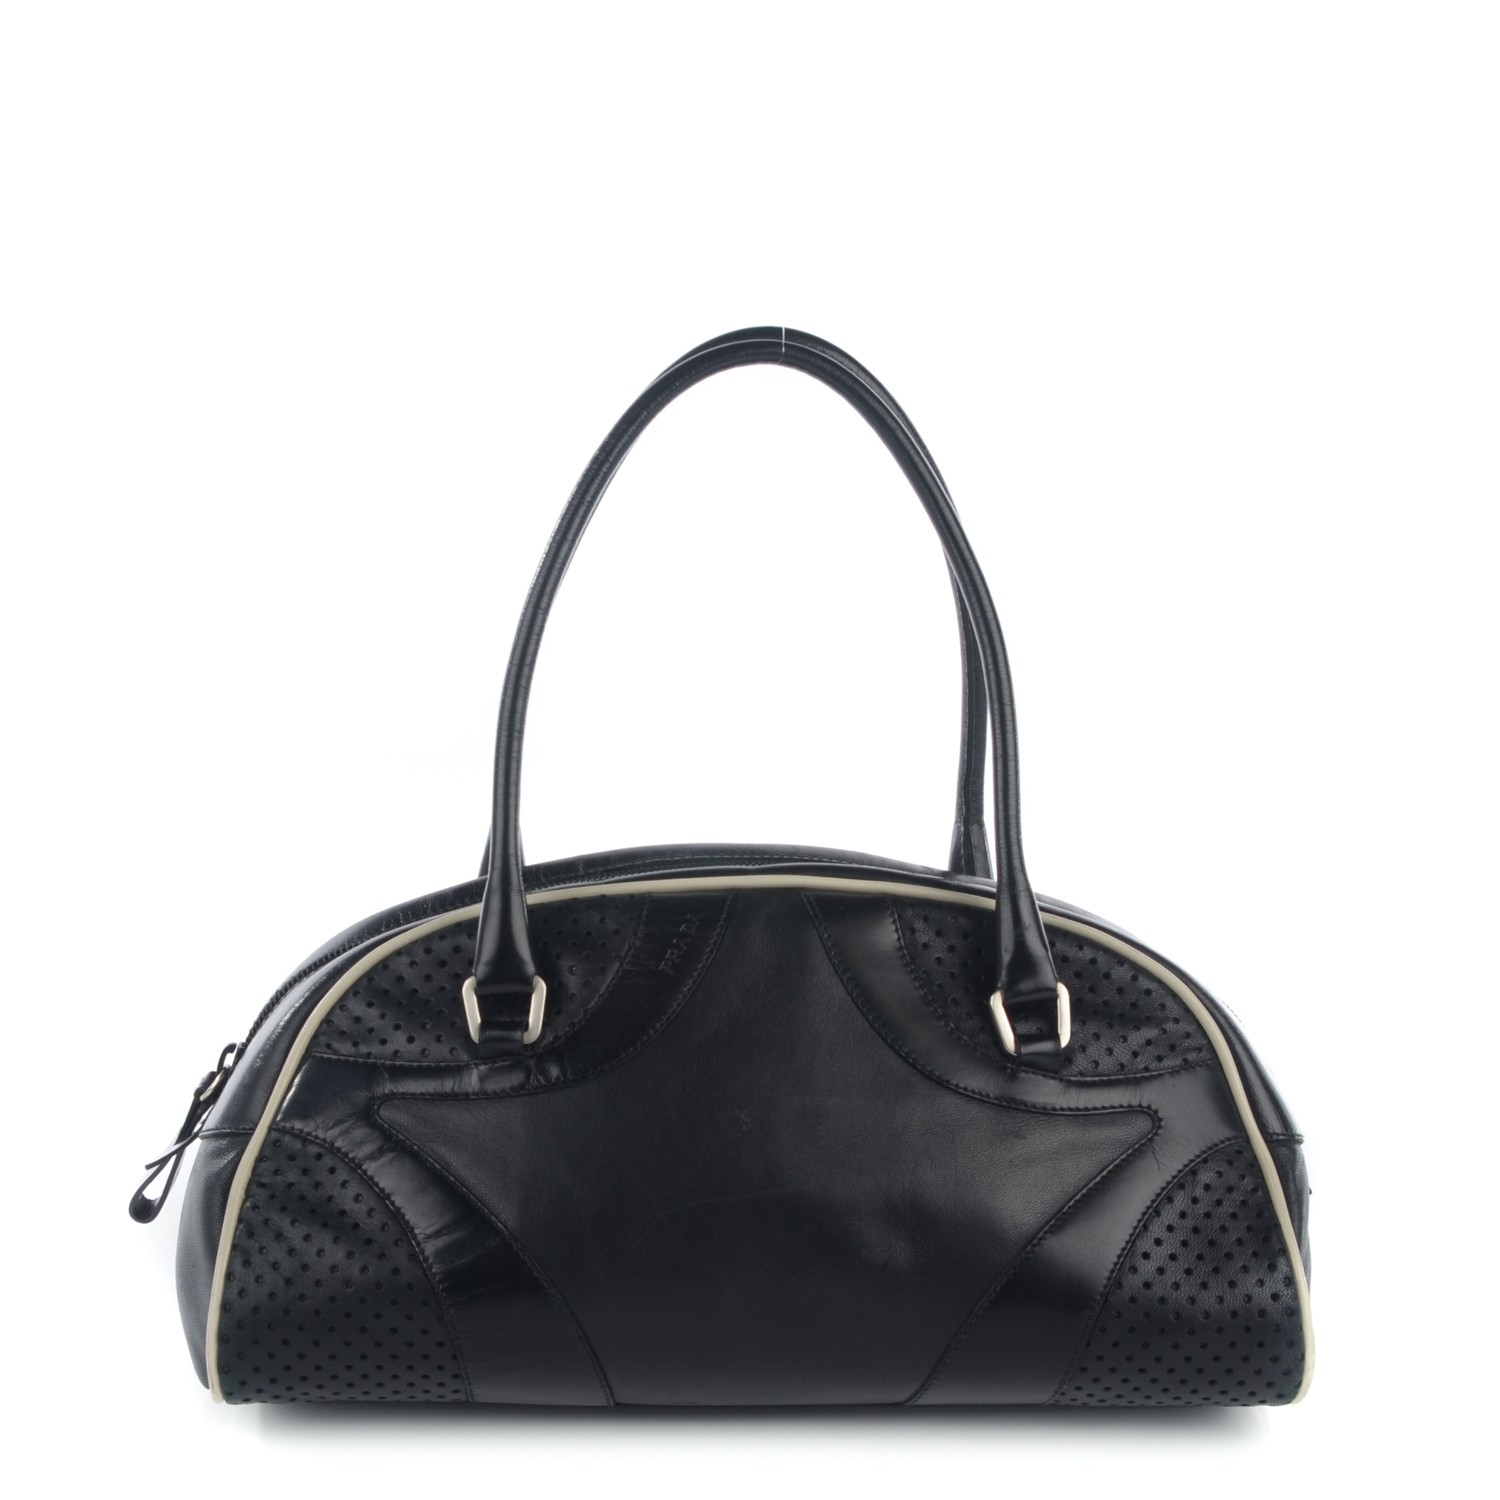 this is a front view image of a prada perforated bowler bag from the early 2000s in the color black by FASHIONPHILE